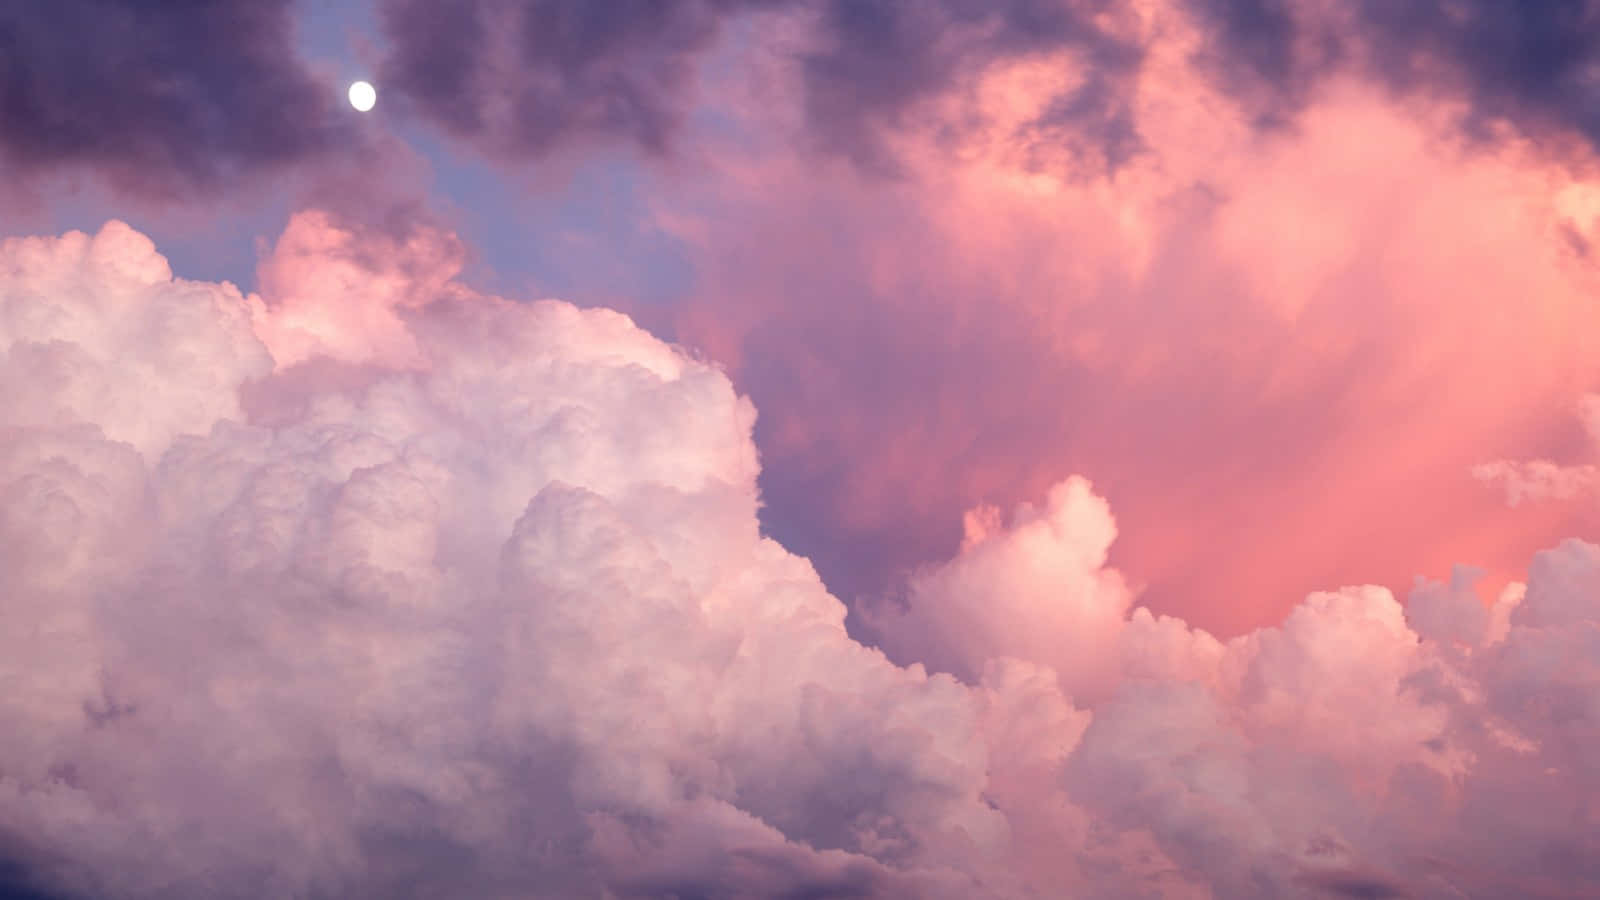 Bright Moon Through Pink Clouds Background